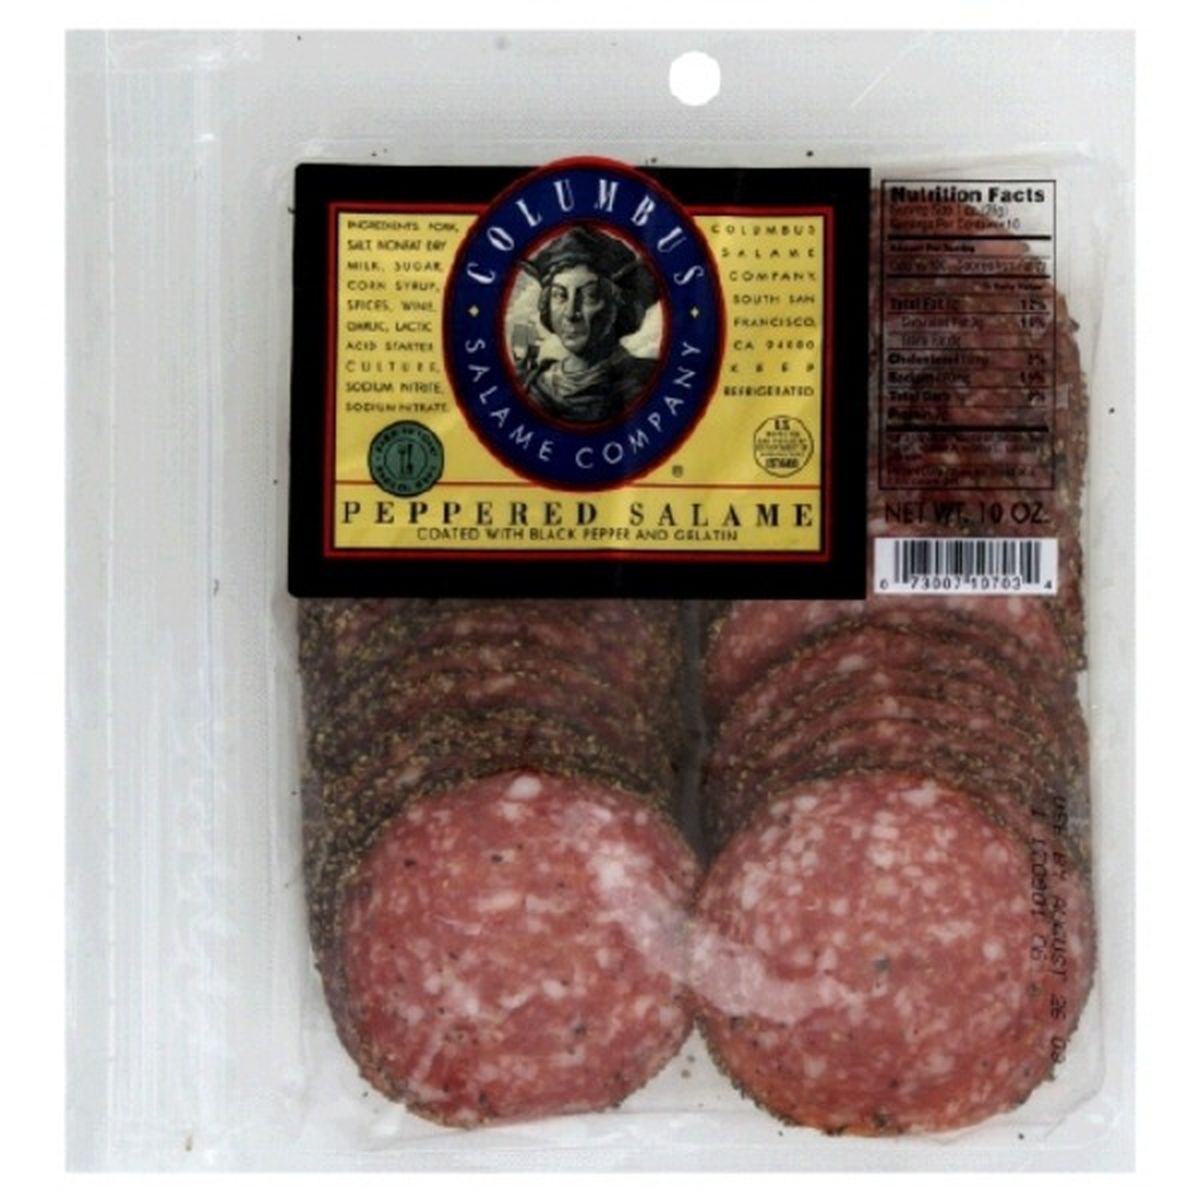 Calories in Columbus Salame Company Peppered Salame